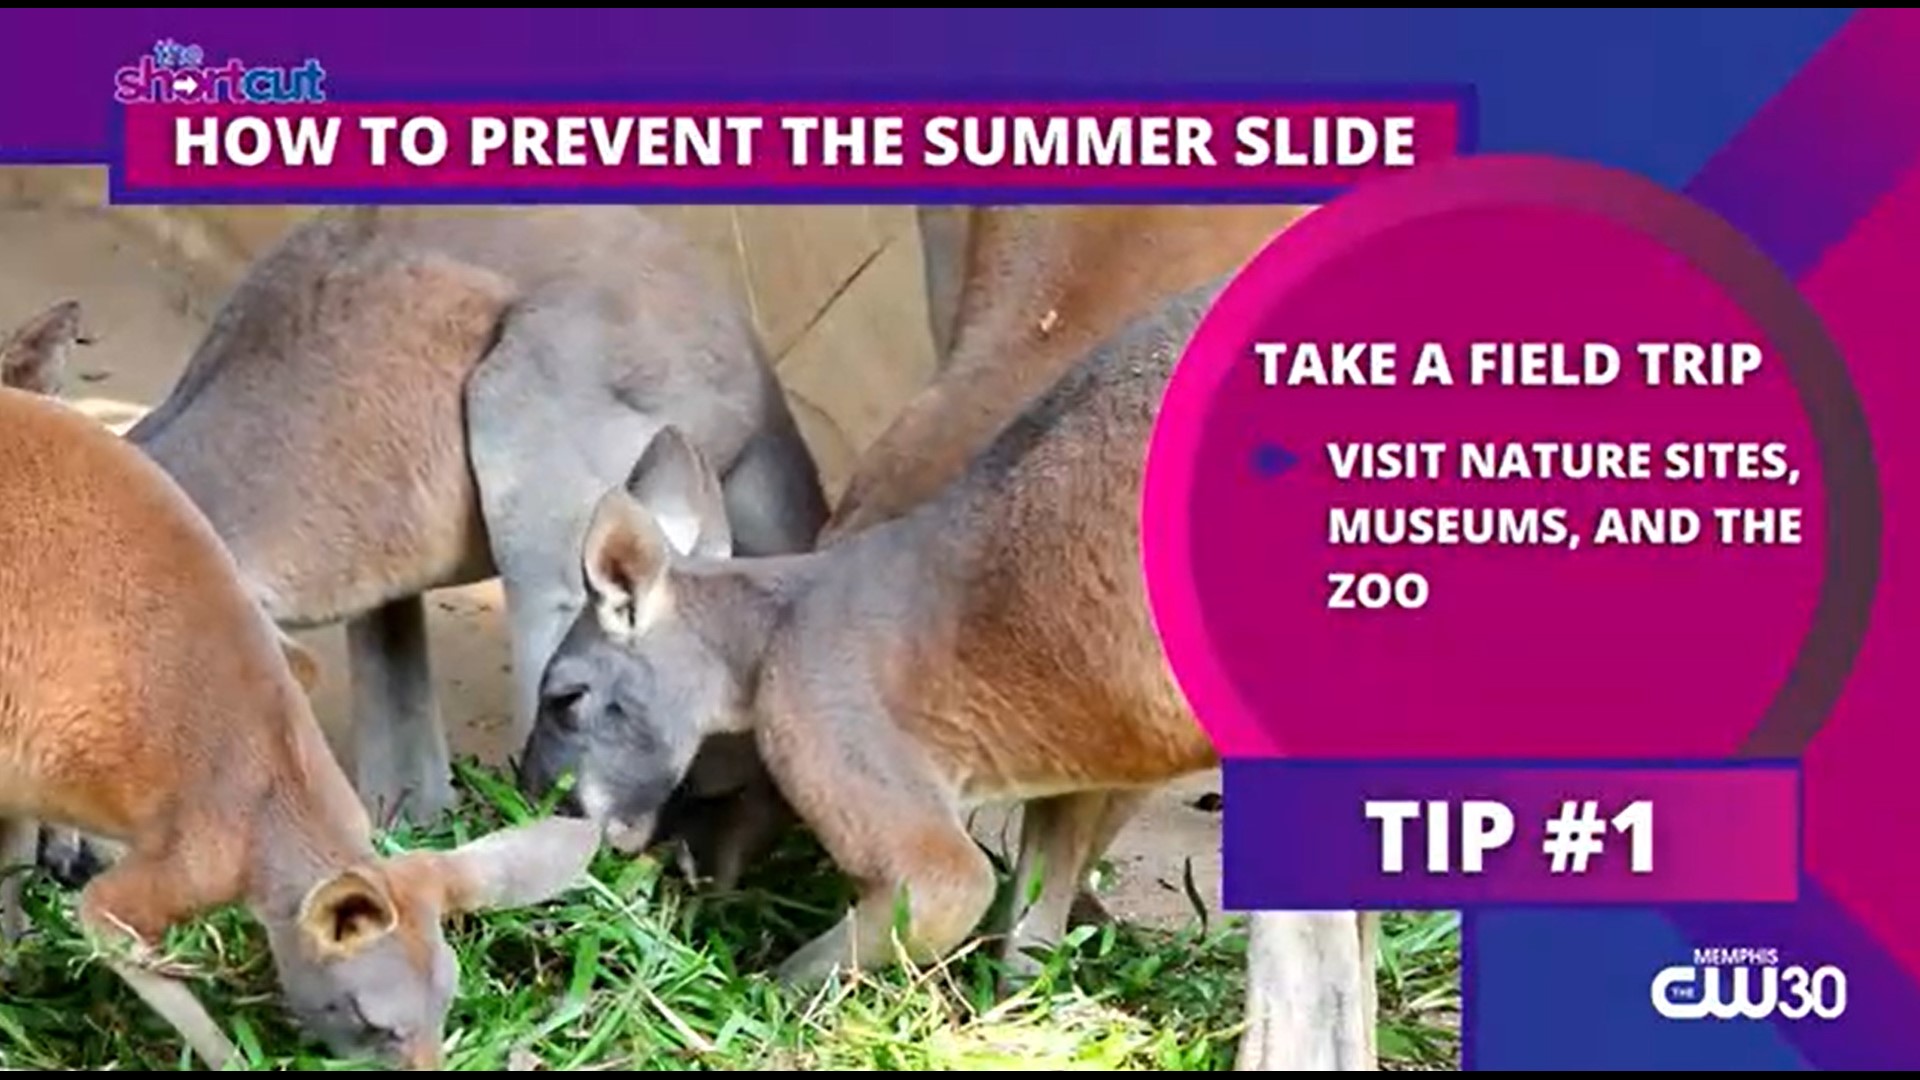 Looking to prevent "summer slide" and/or mosquito bites this summer? Check out these tips on this week's "The Shortcut"! Featuring lifestyle host Sydney Neely.